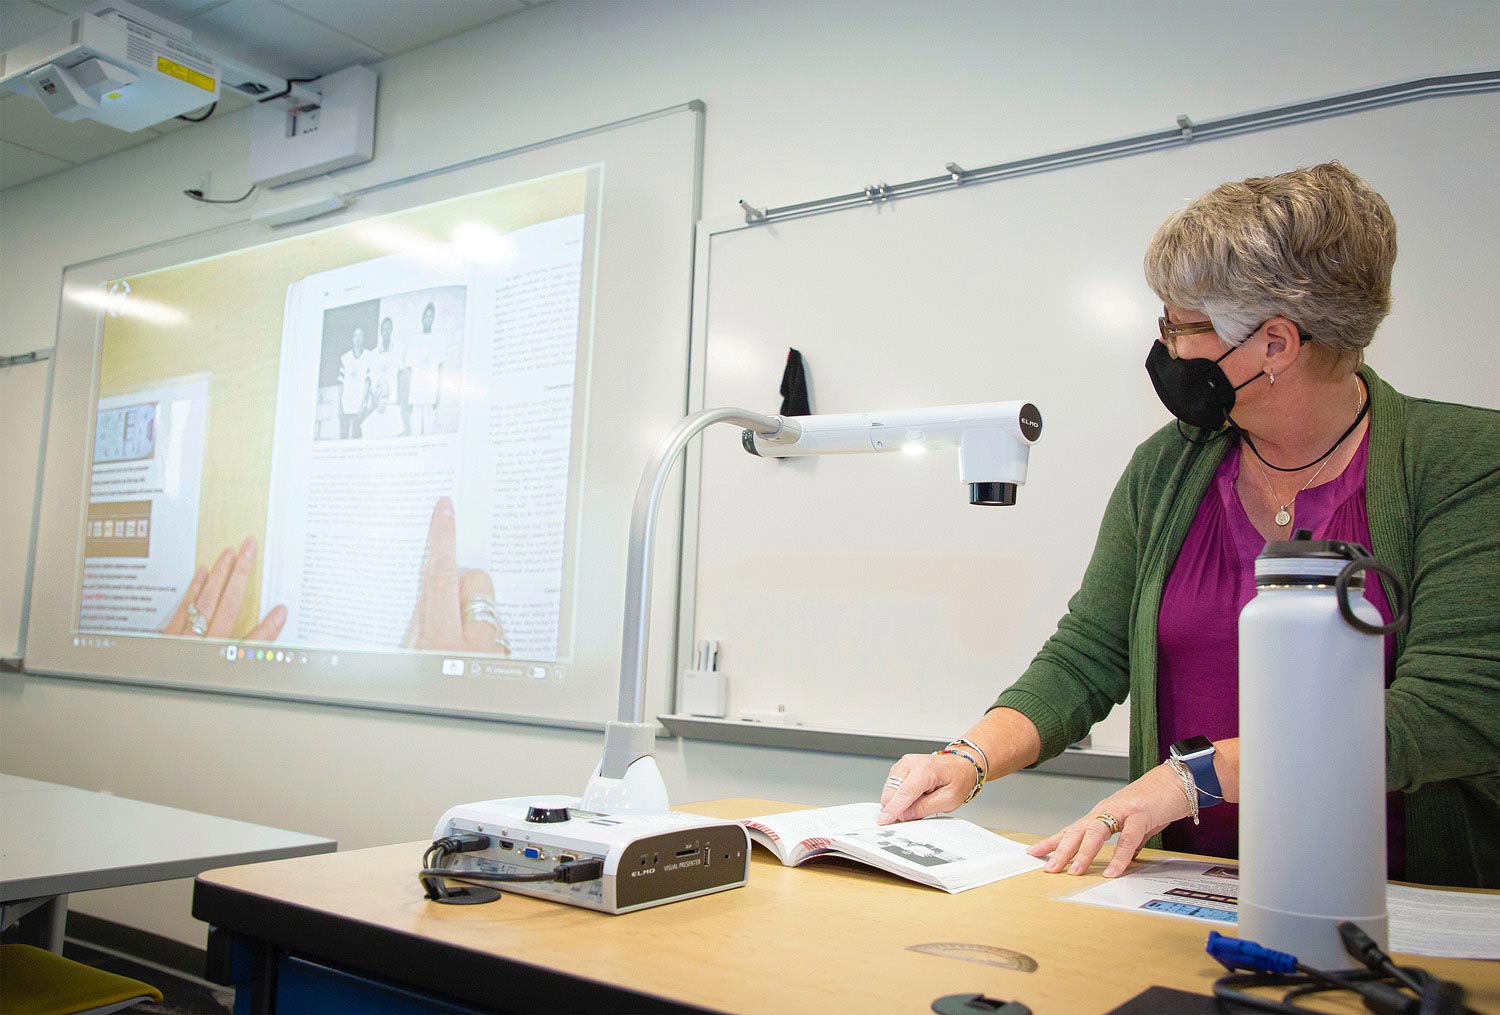 Classroom AV system in a typical setting. Here, the instructor is projecting an image from the document camera.